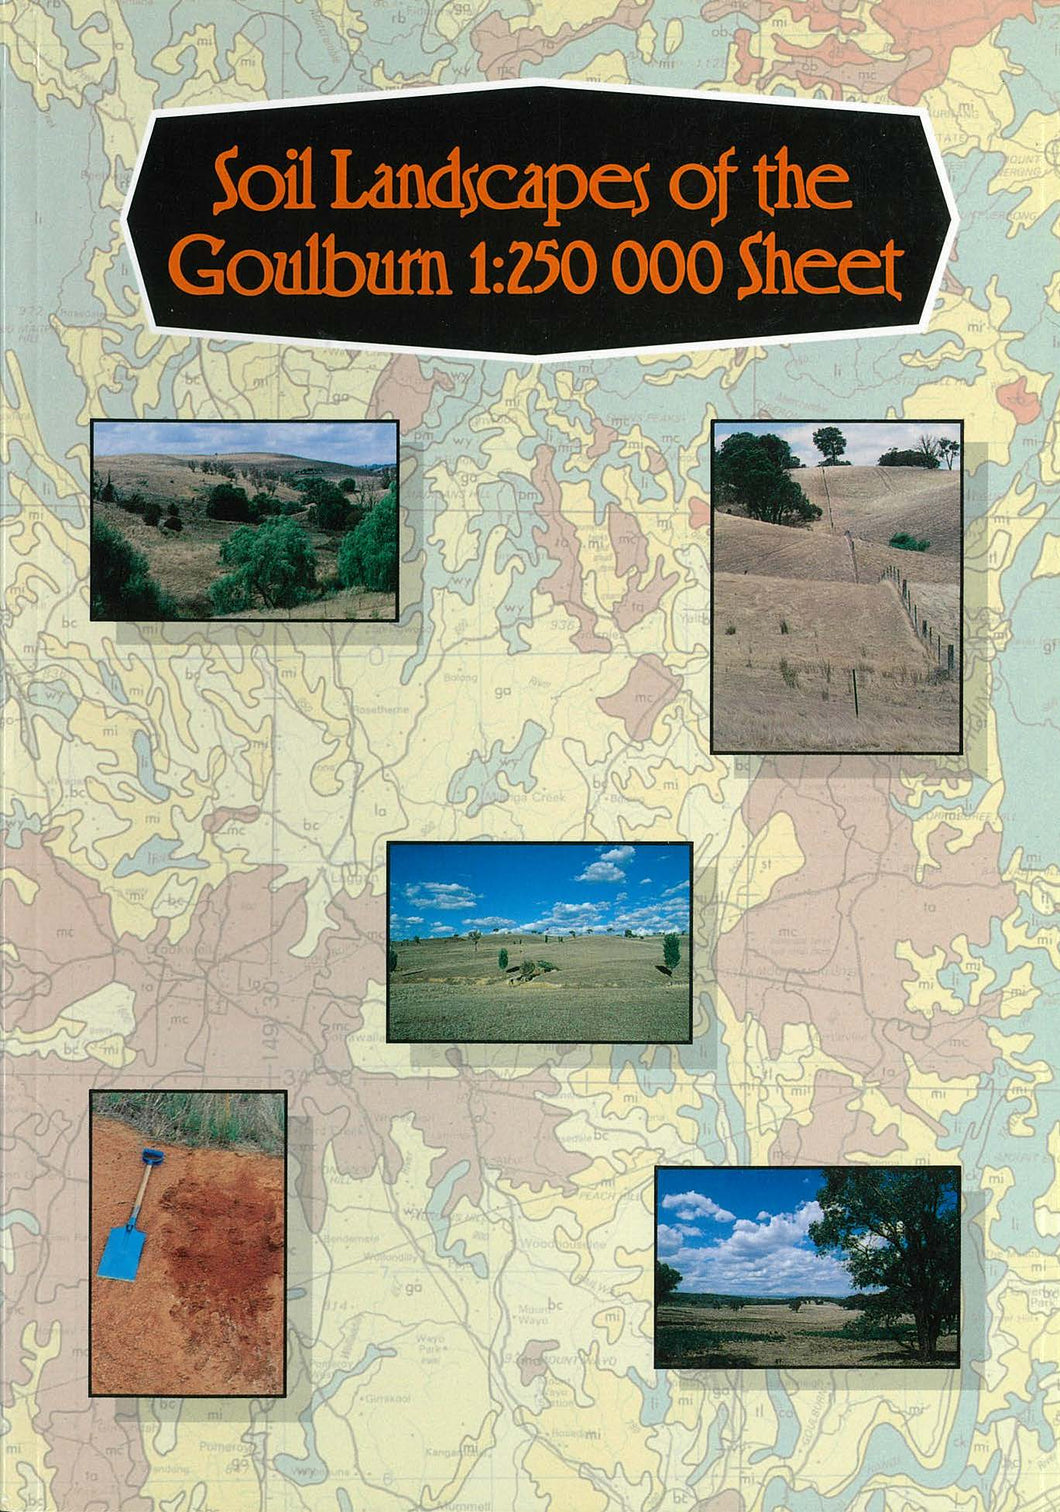 Soil Landscapes of the Goulburn 1:250 000 Sheet report cover